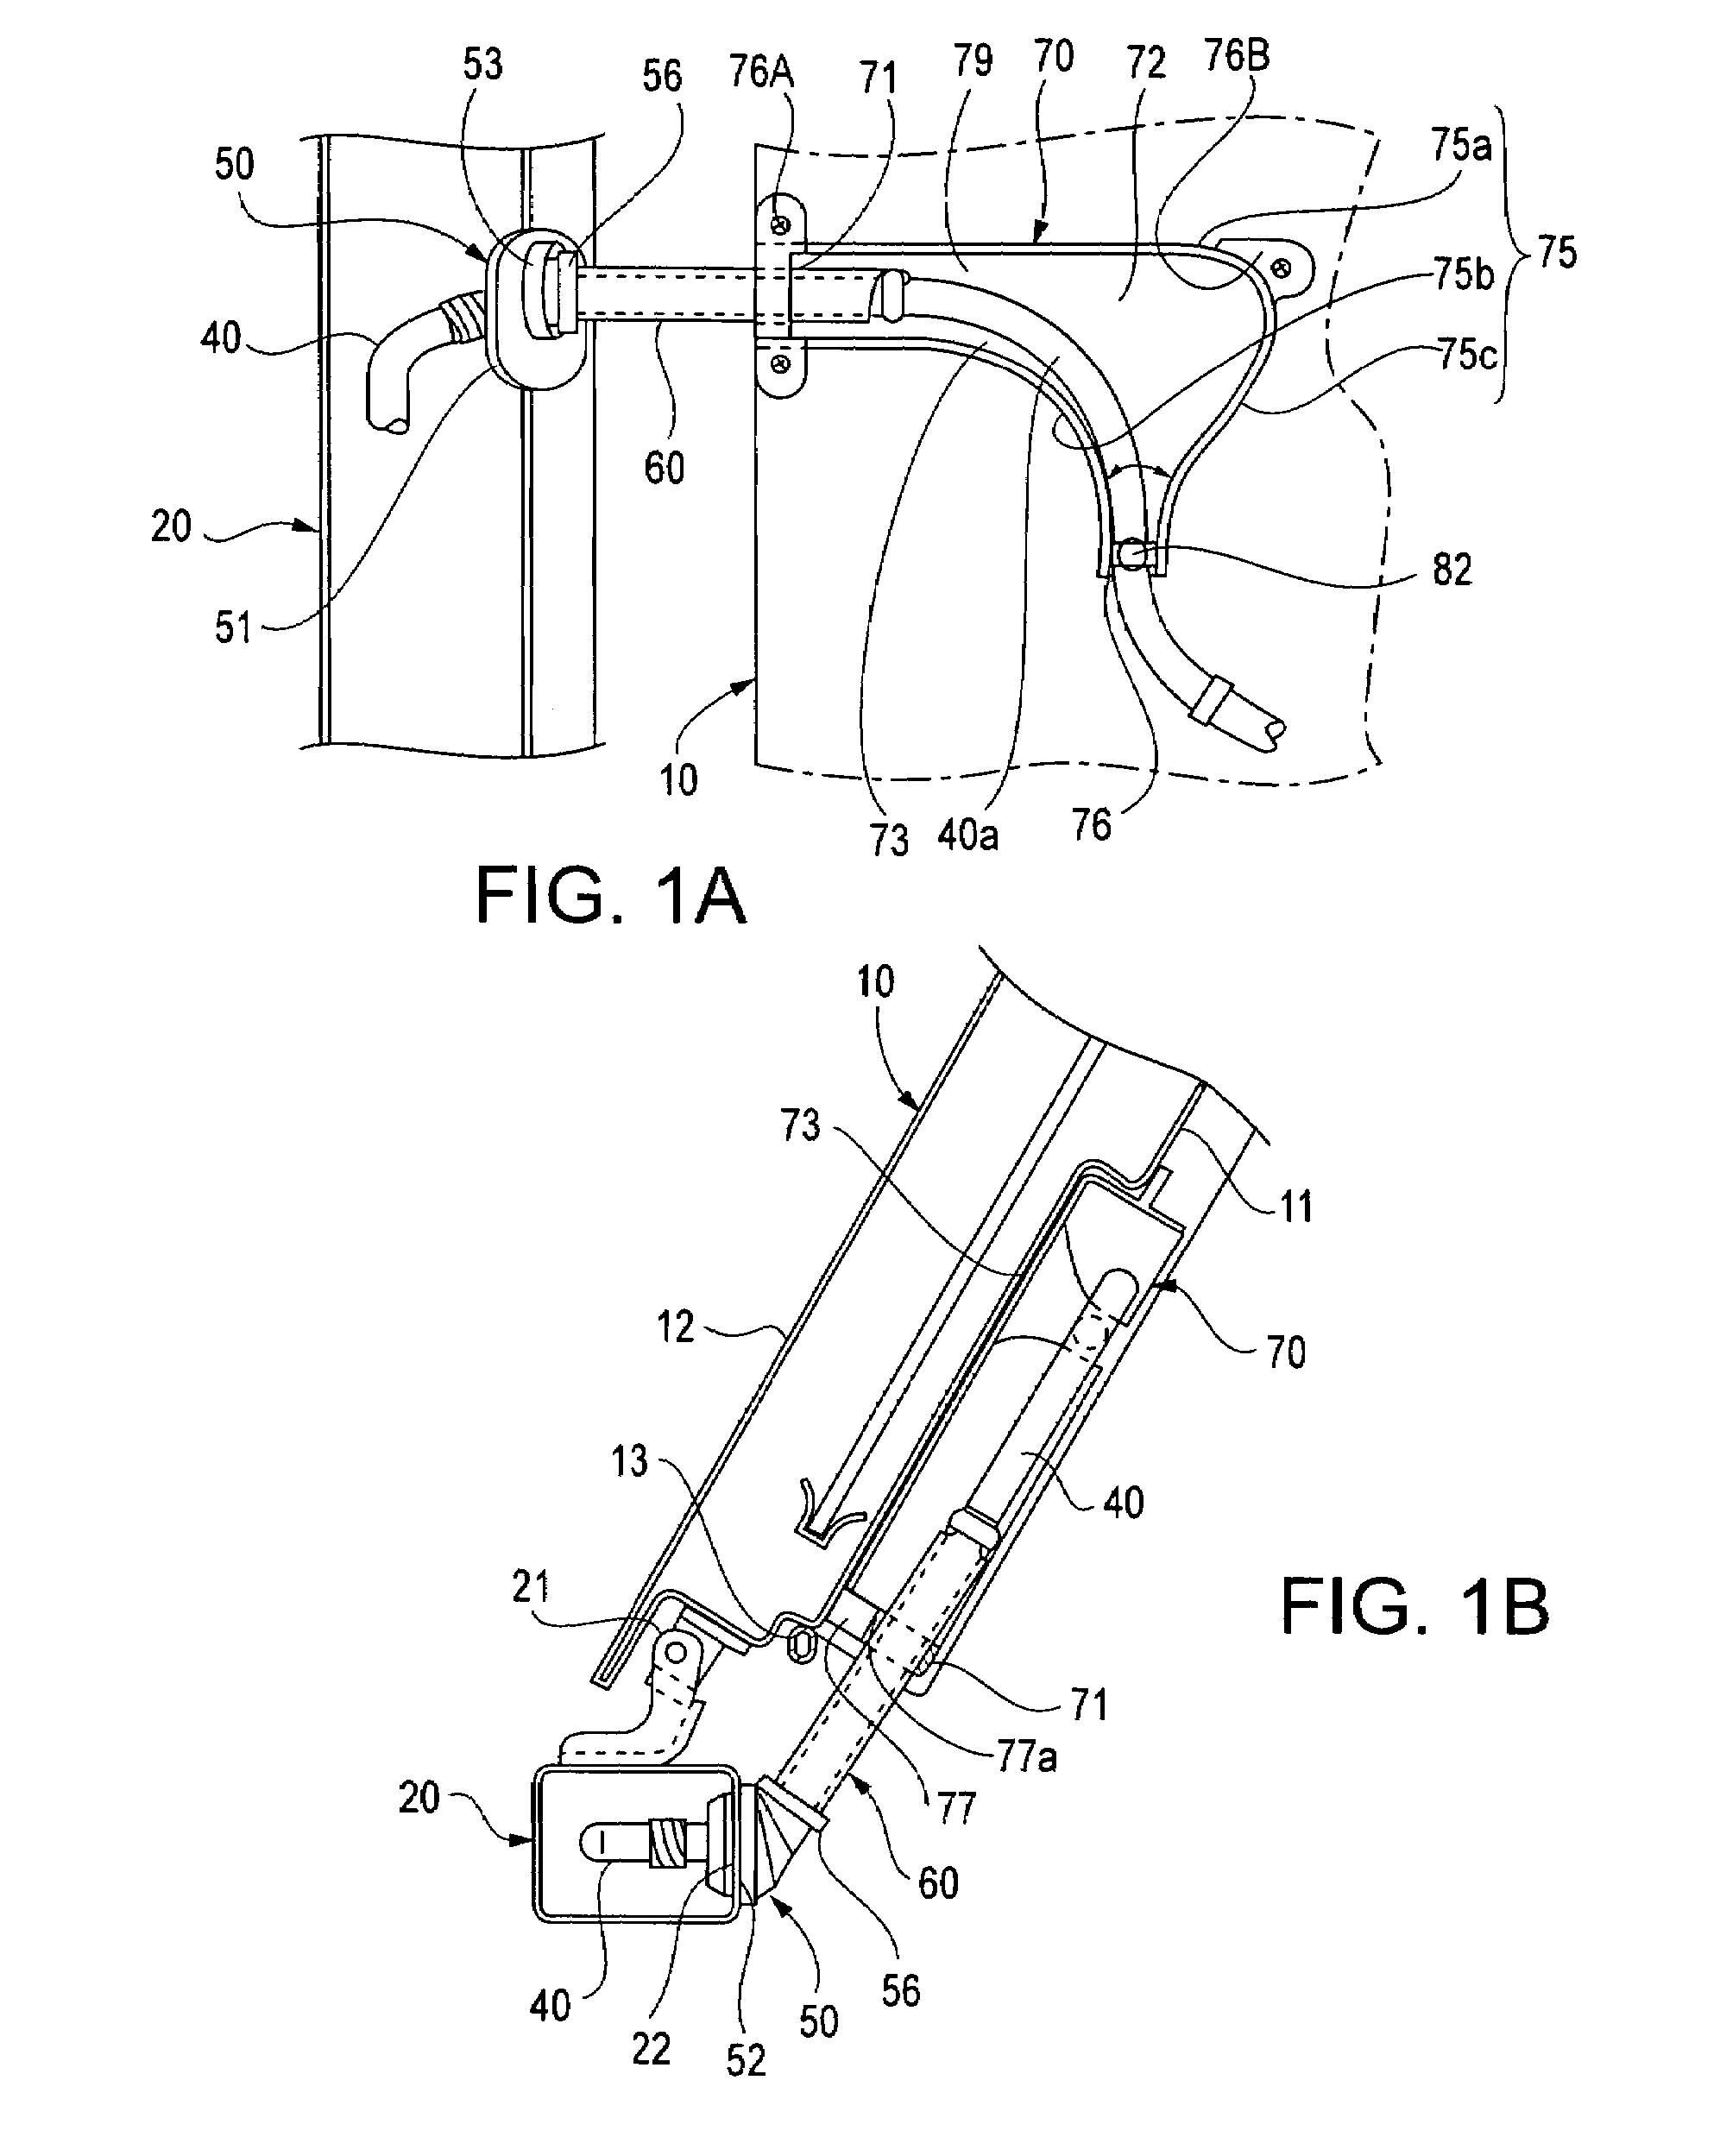 Wire harness construction